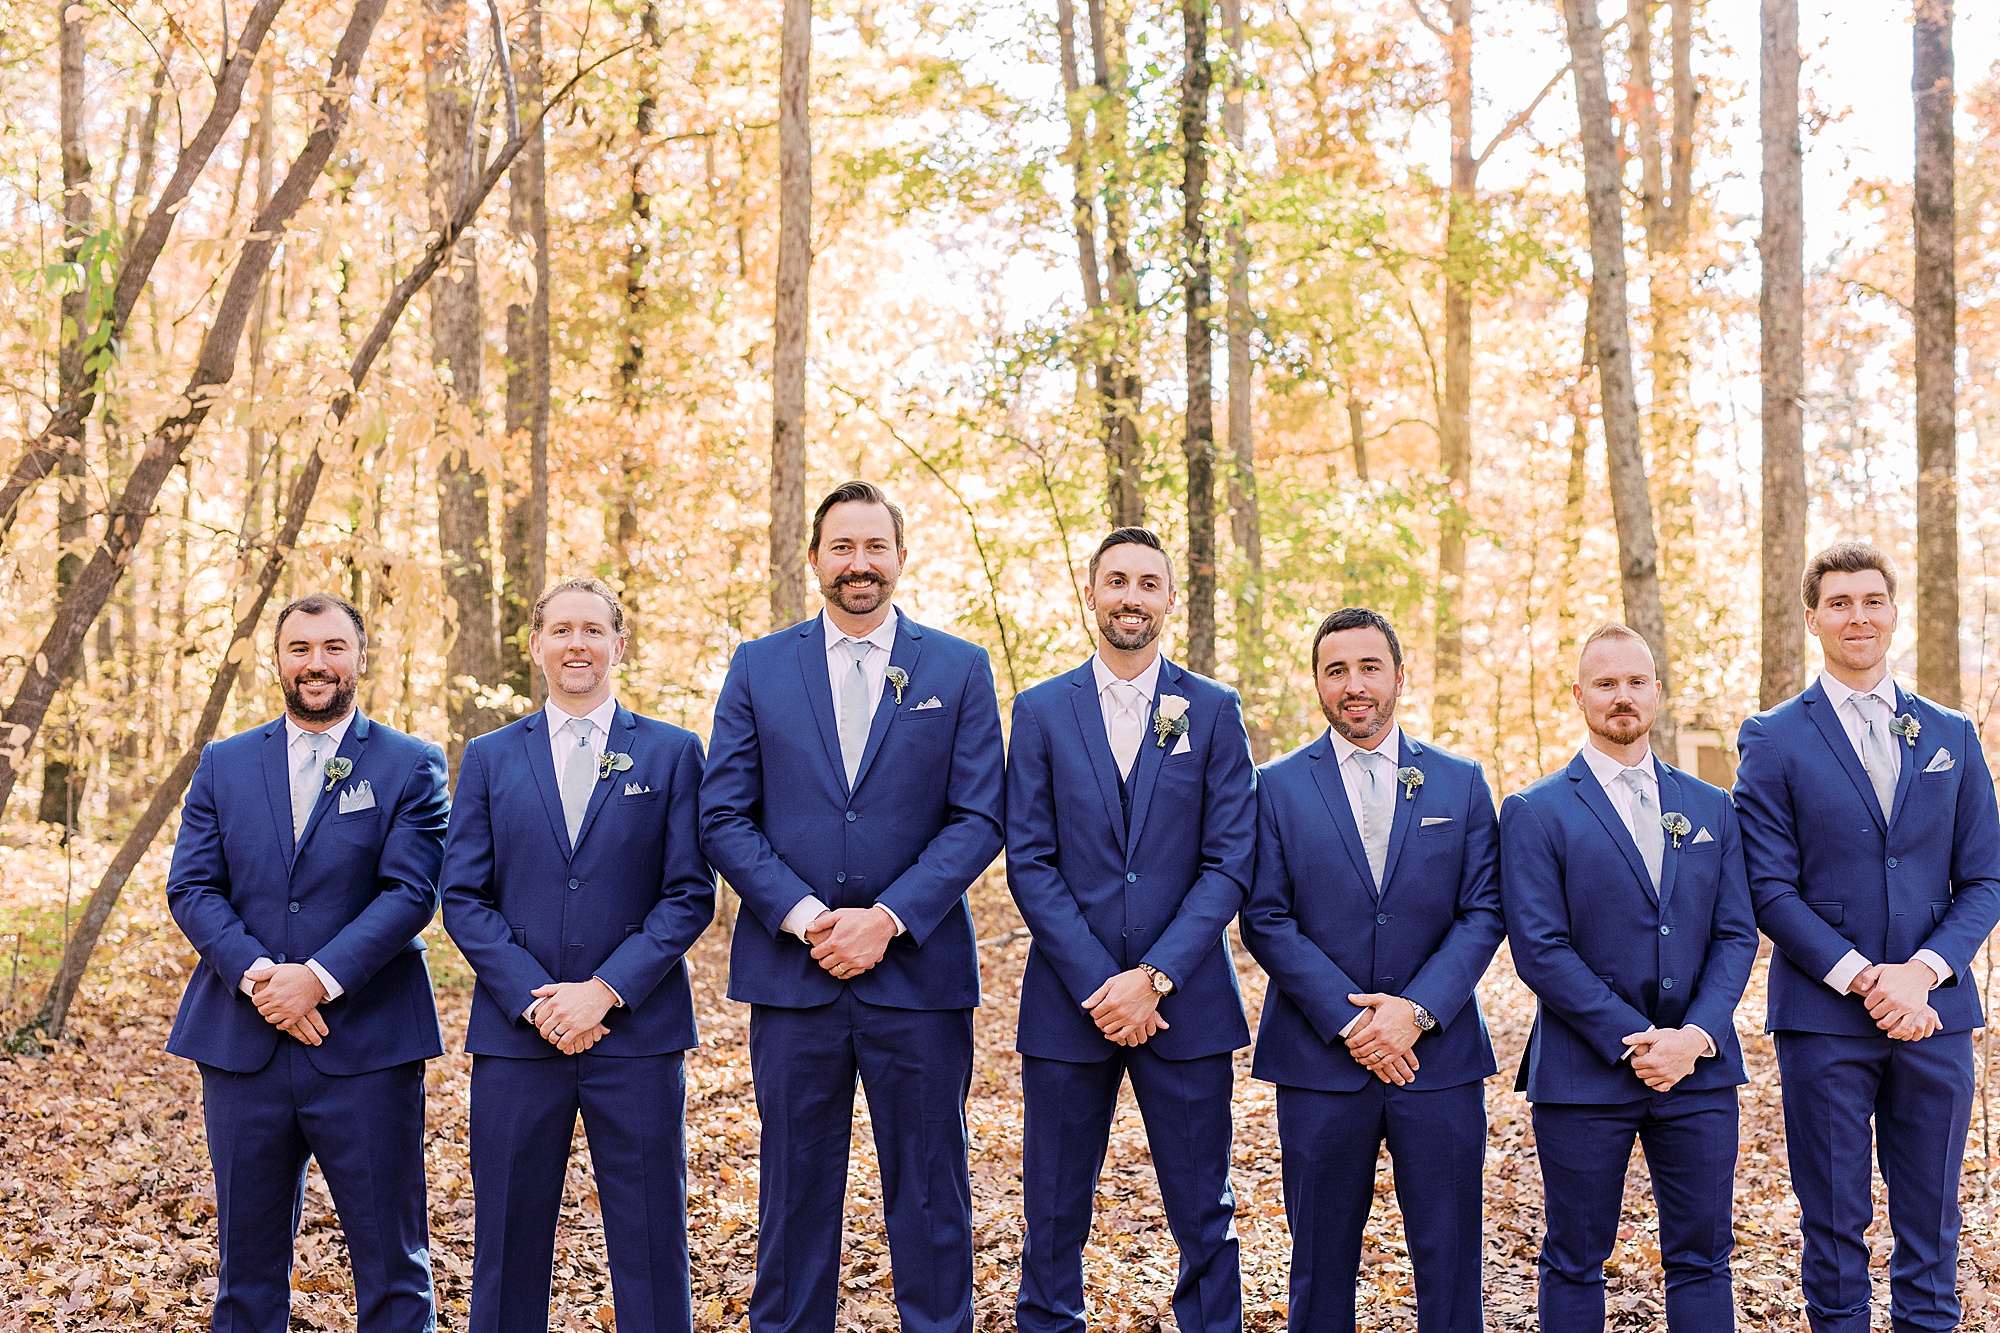 groom stand with groomsmen in navy blue suits